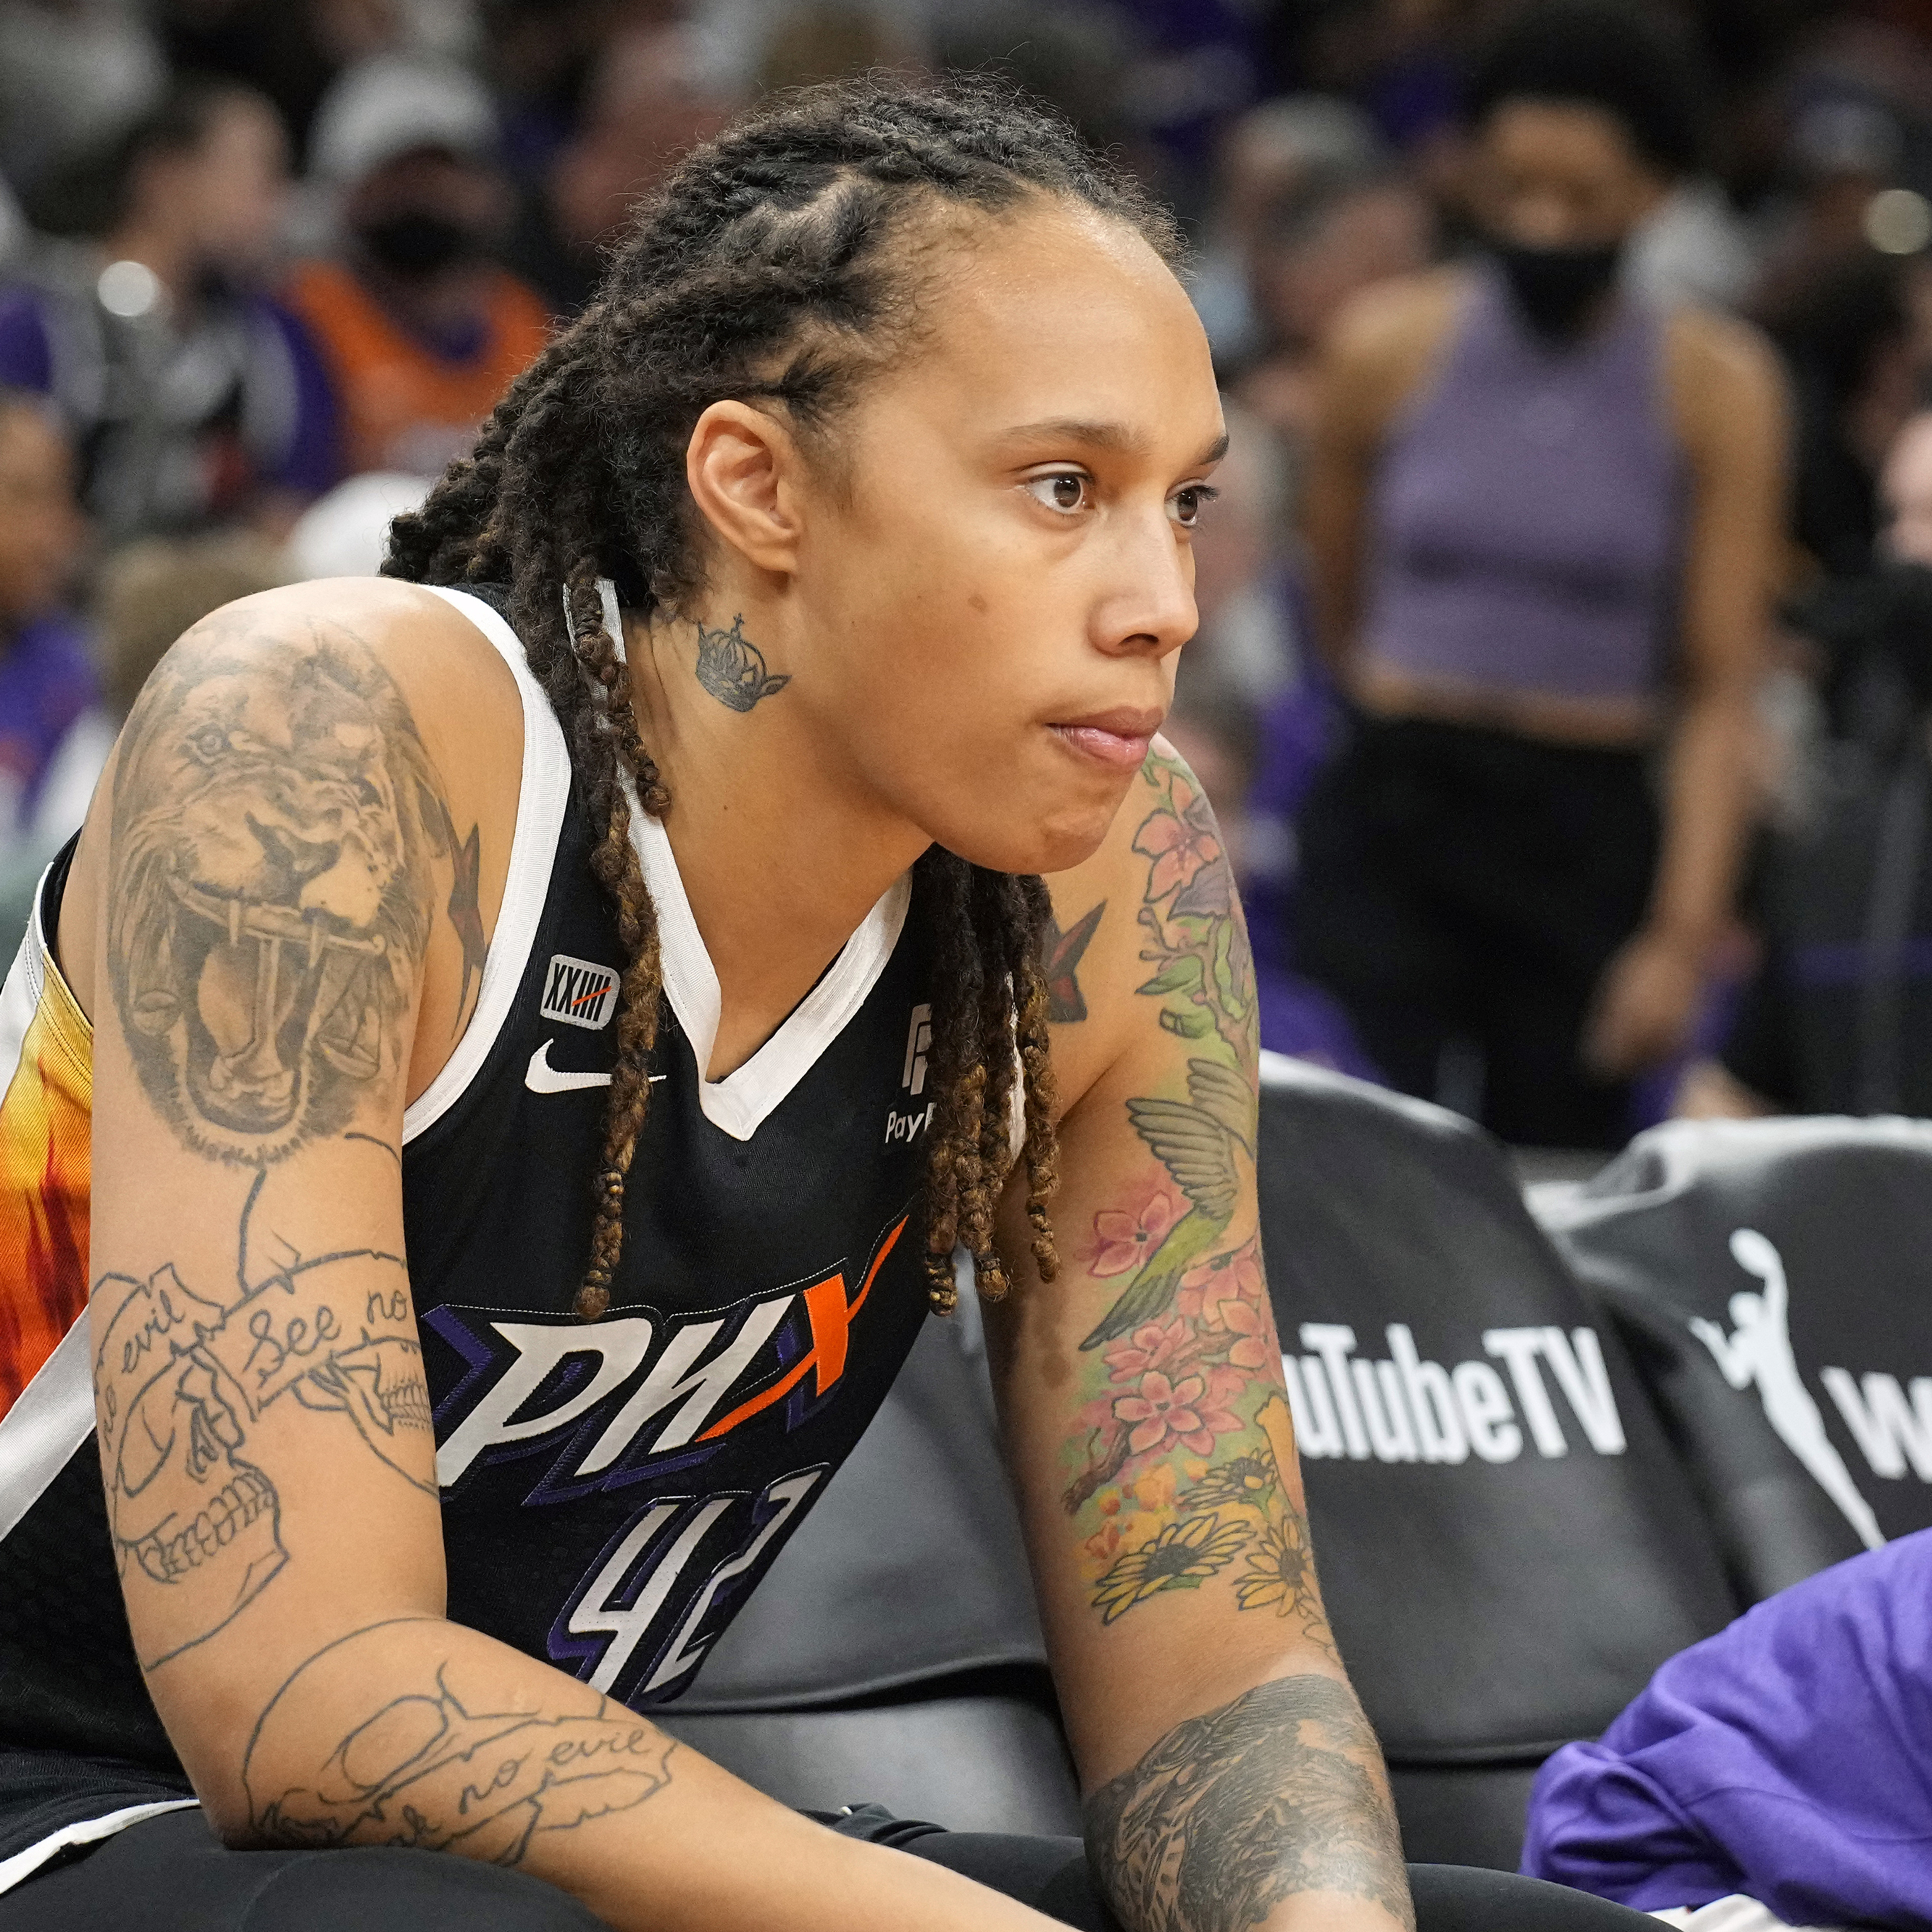 Brittney Griner's Pre-Trial Detention Extended Through July 2 by Russian Court